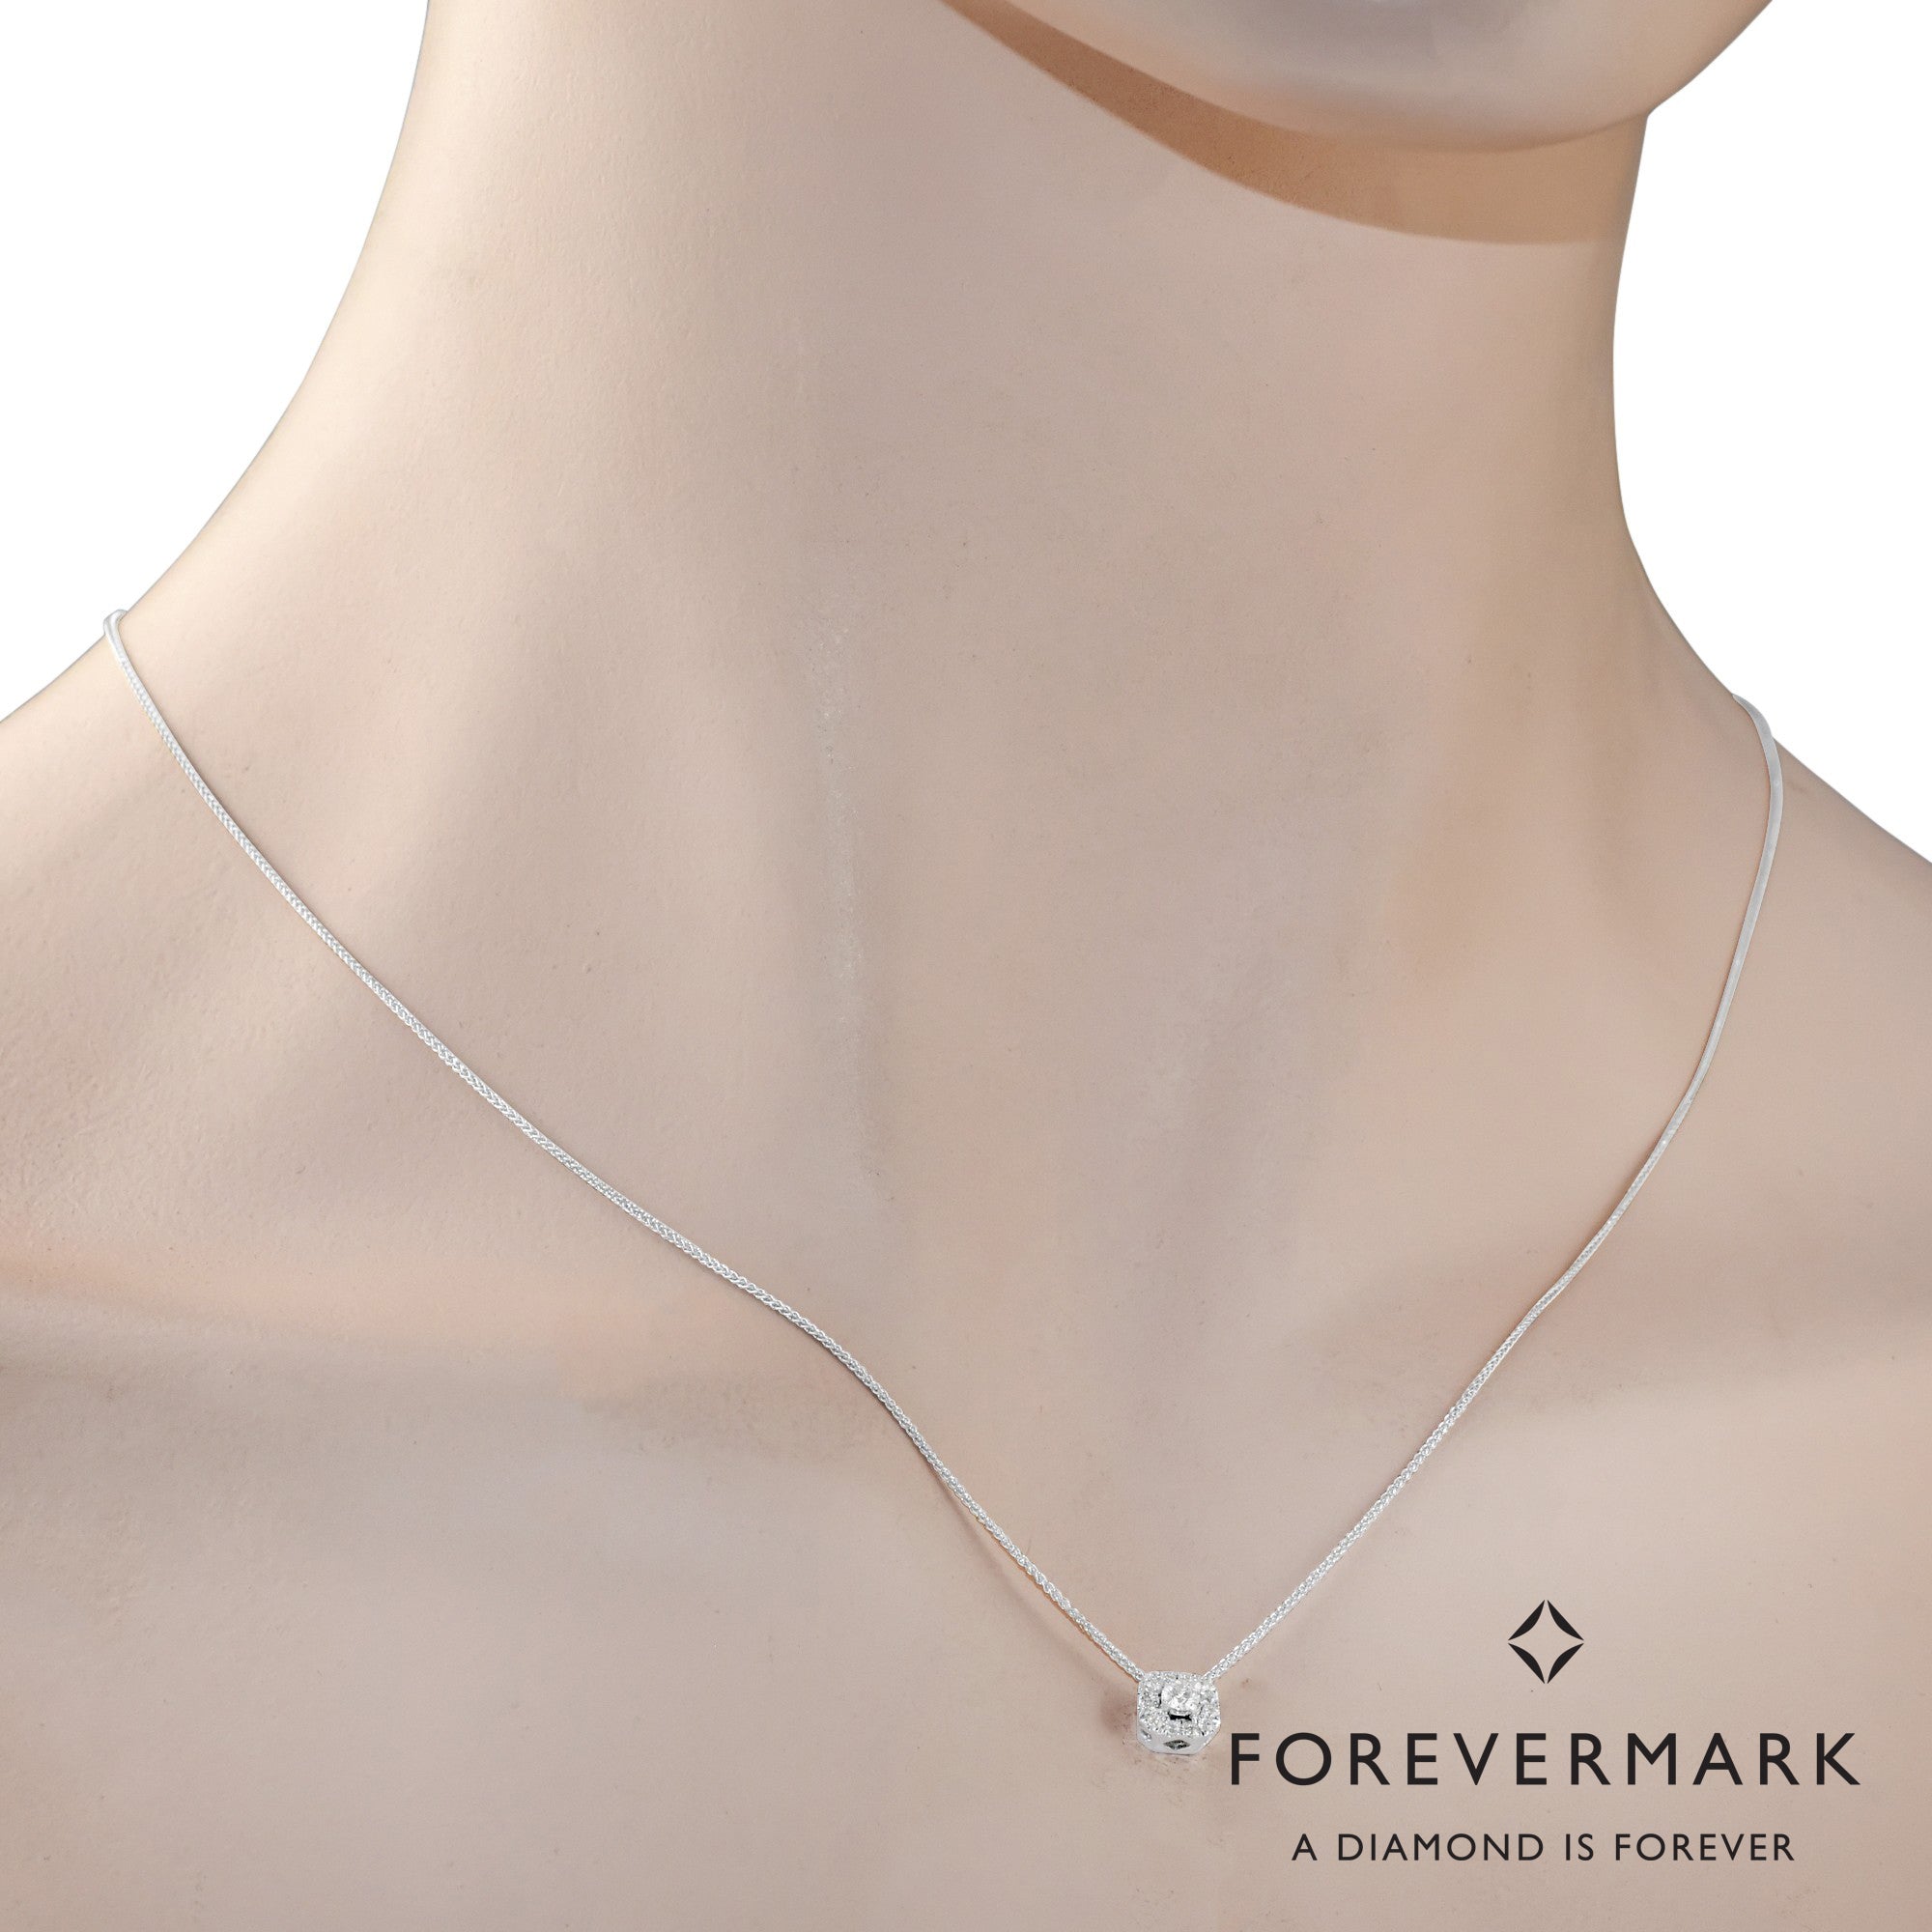 De Beers Forevermark Center of My Universe Cushion Diamond Halo Necklace in 18kt White Gold (1/7ct tw)